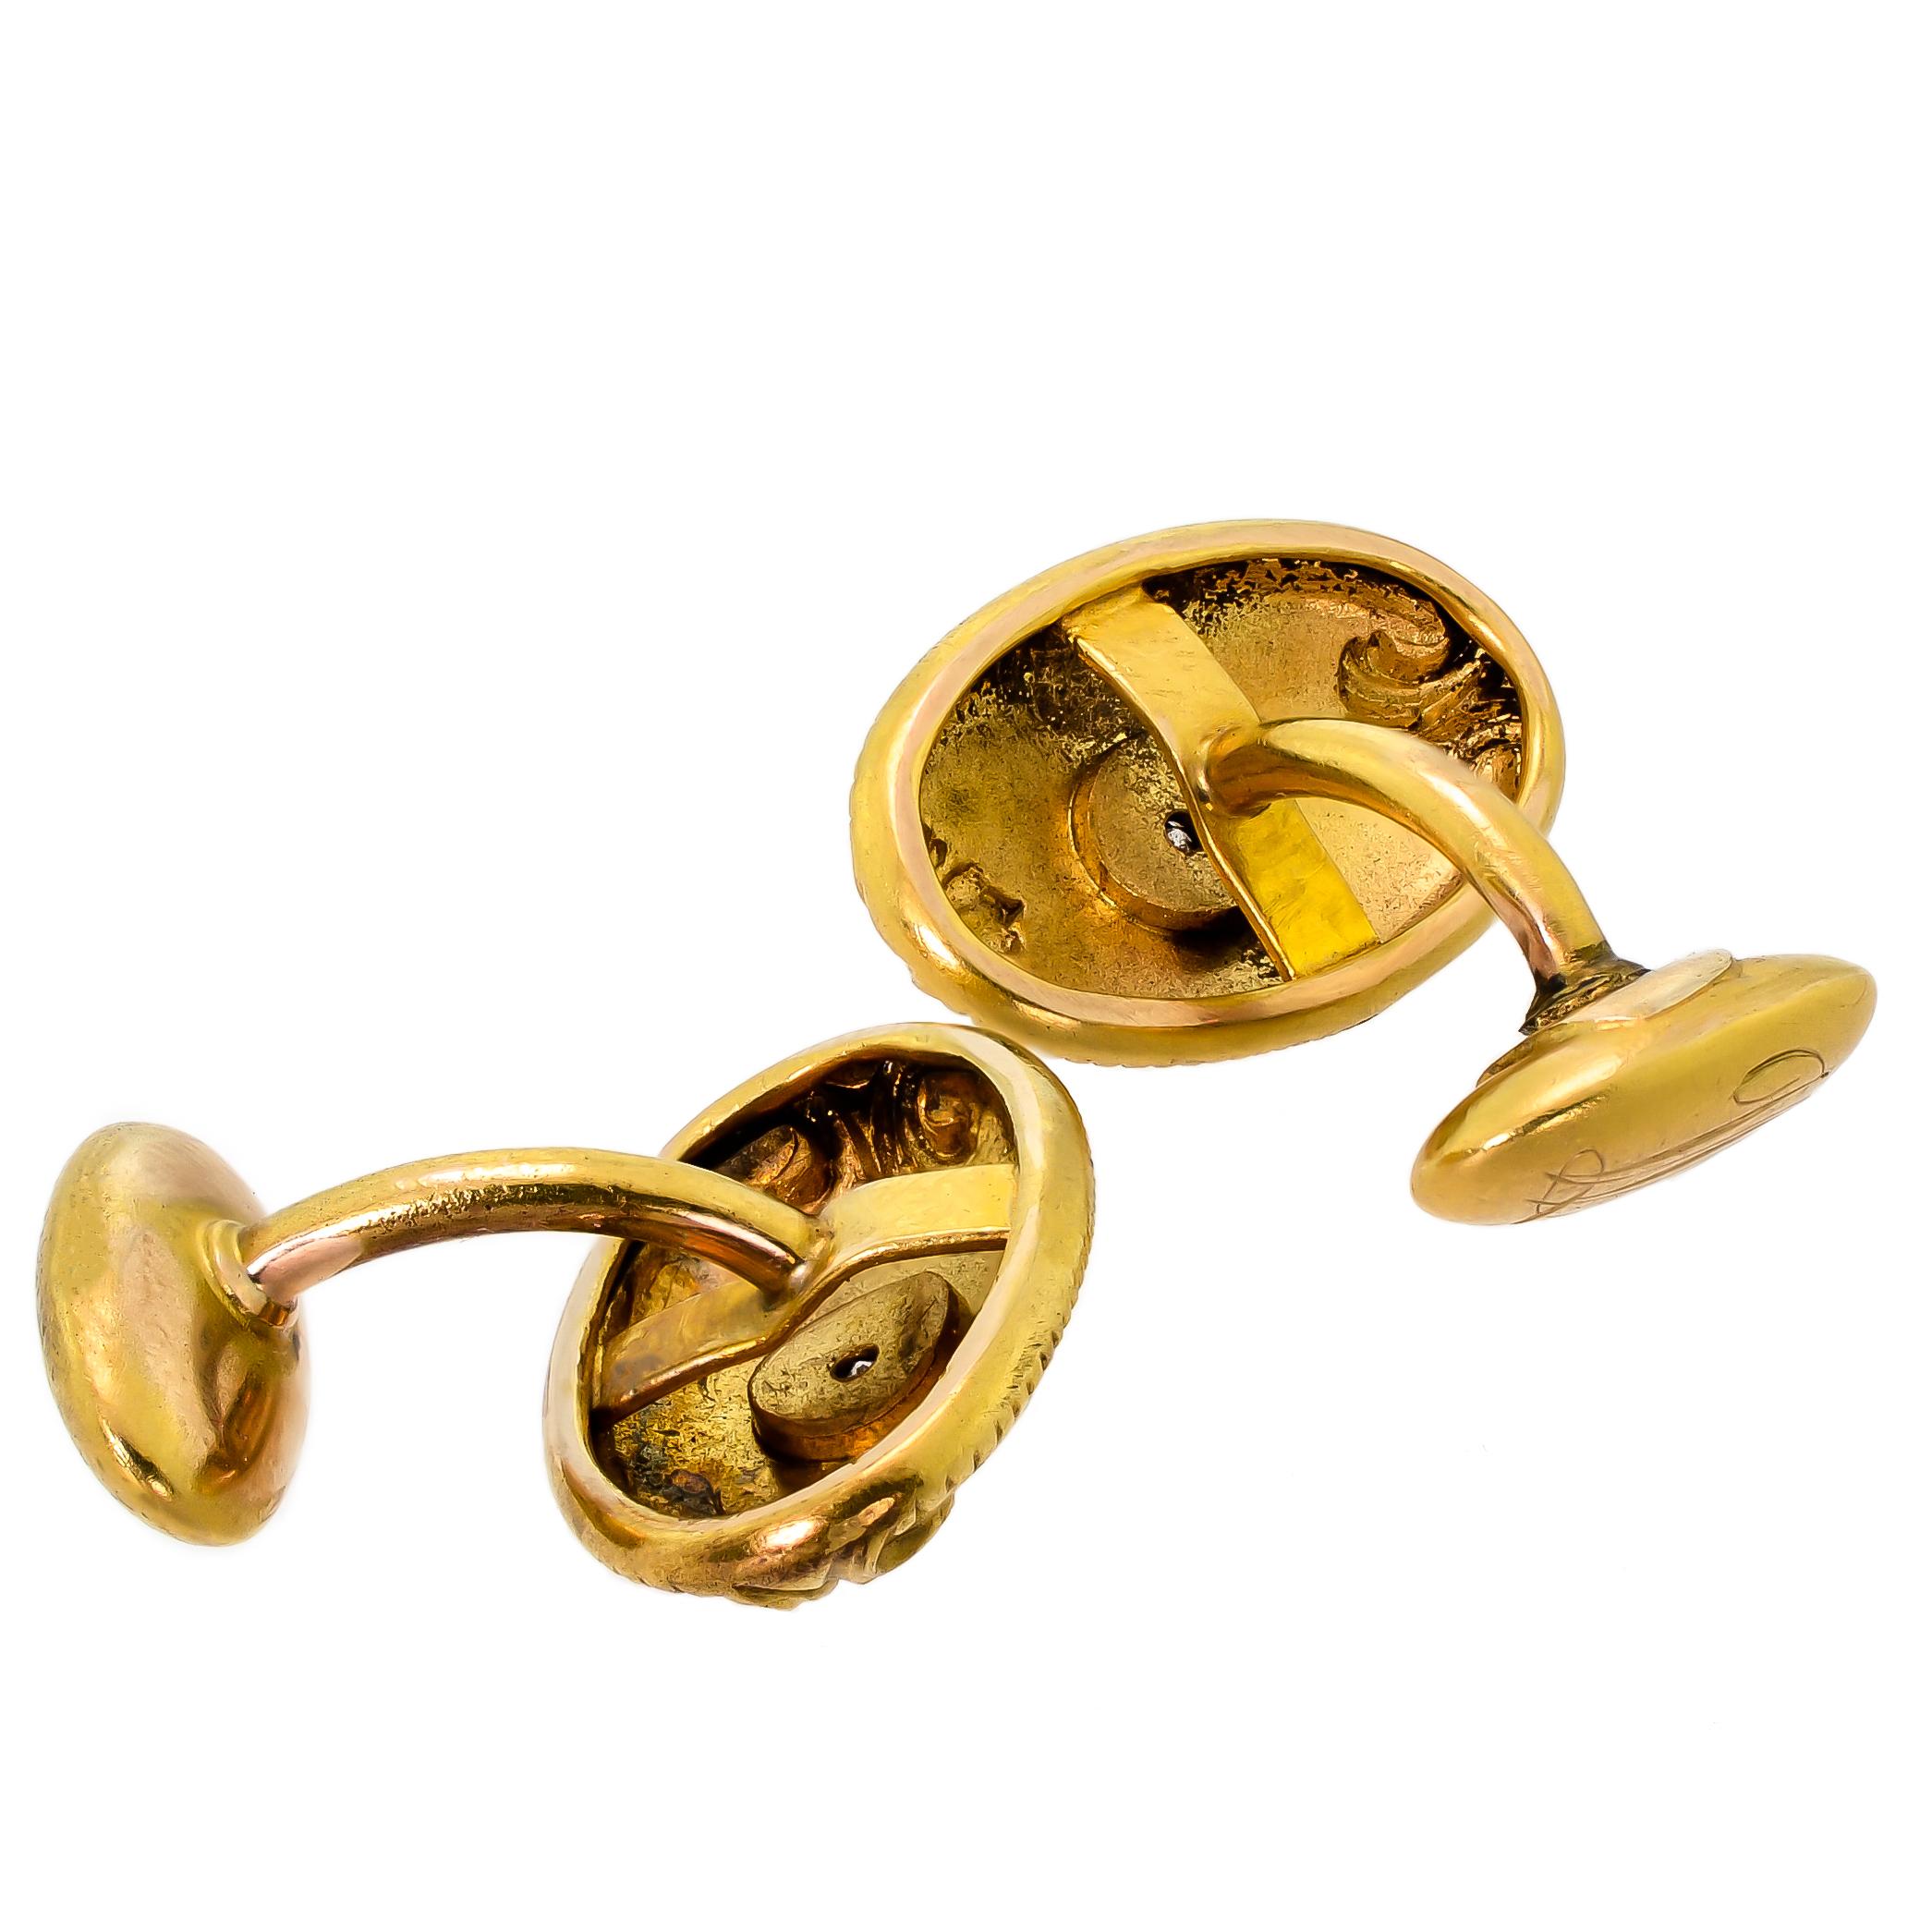 Handsome Victorian 18 Karat Yellow Gold and Diamond Cufflinks In Good Condition For Sale In Wheaton, IL